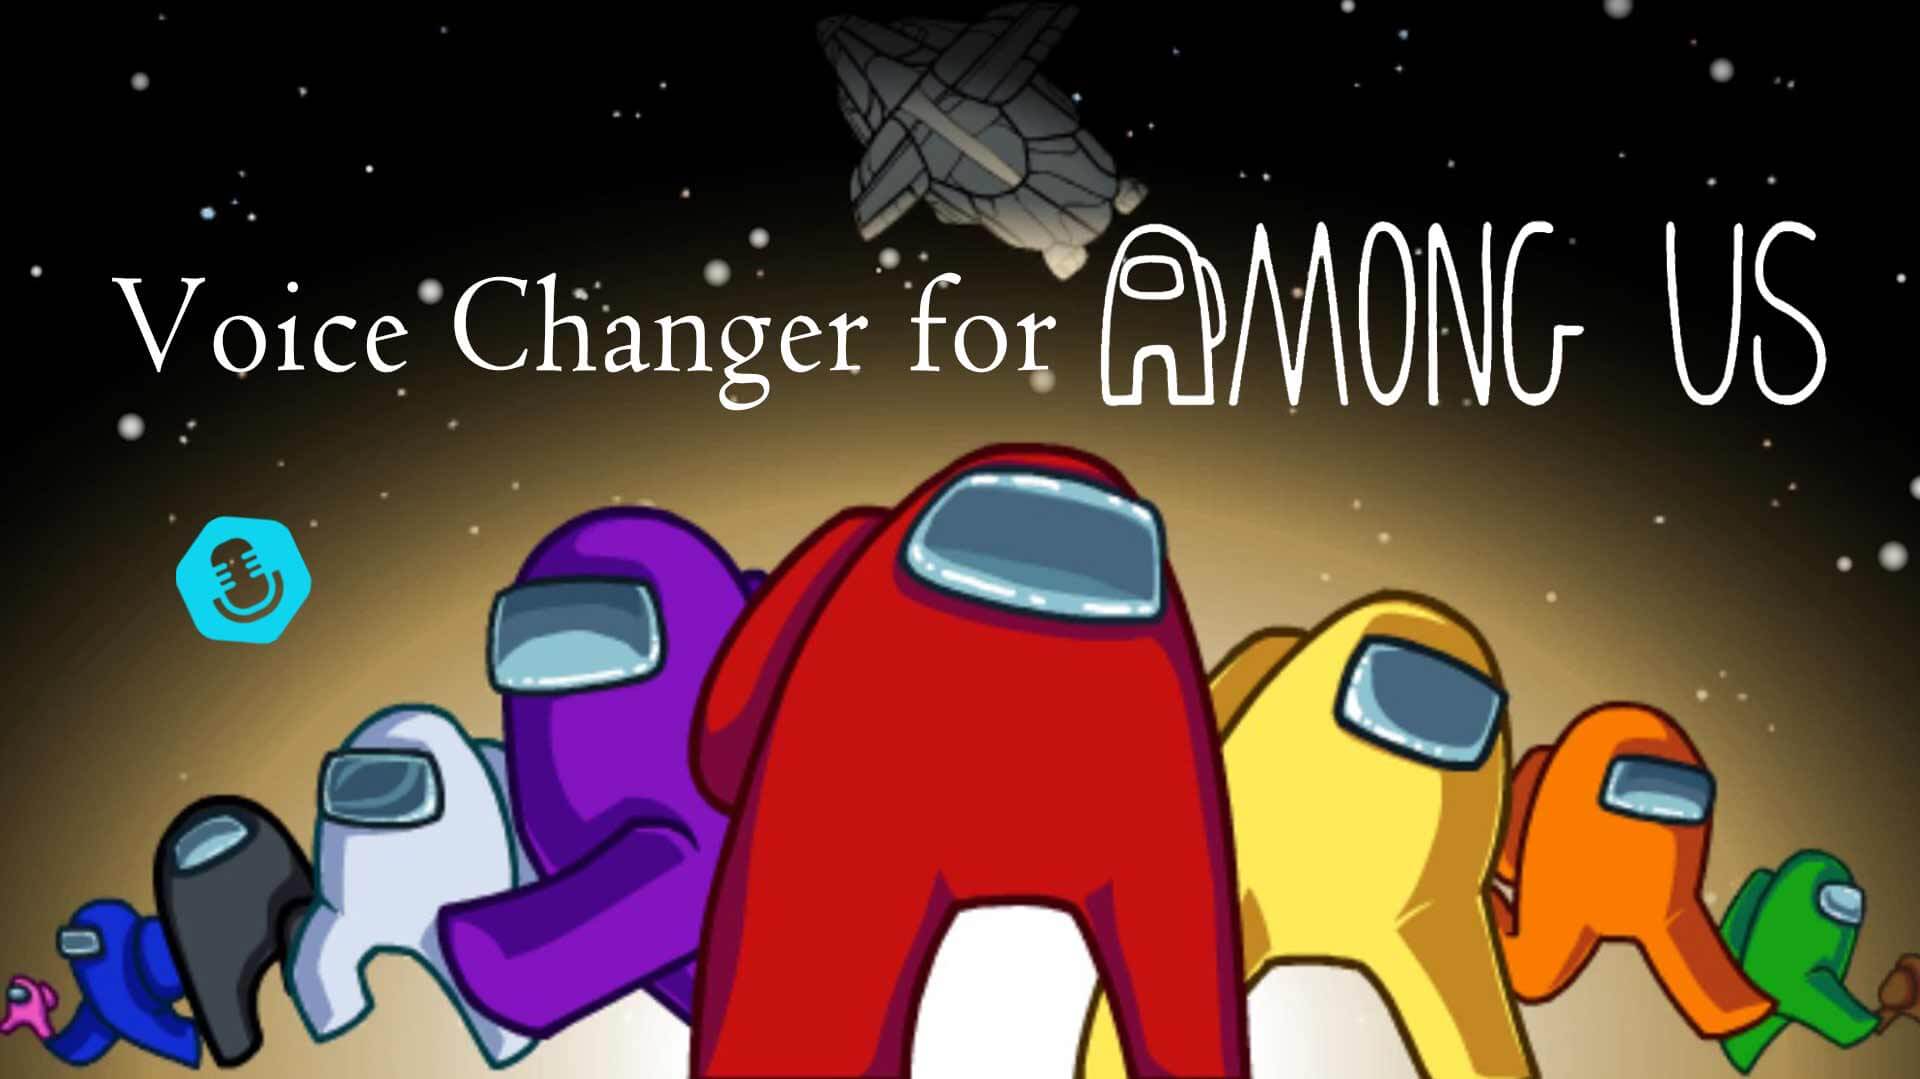 Among Us voice changer cover